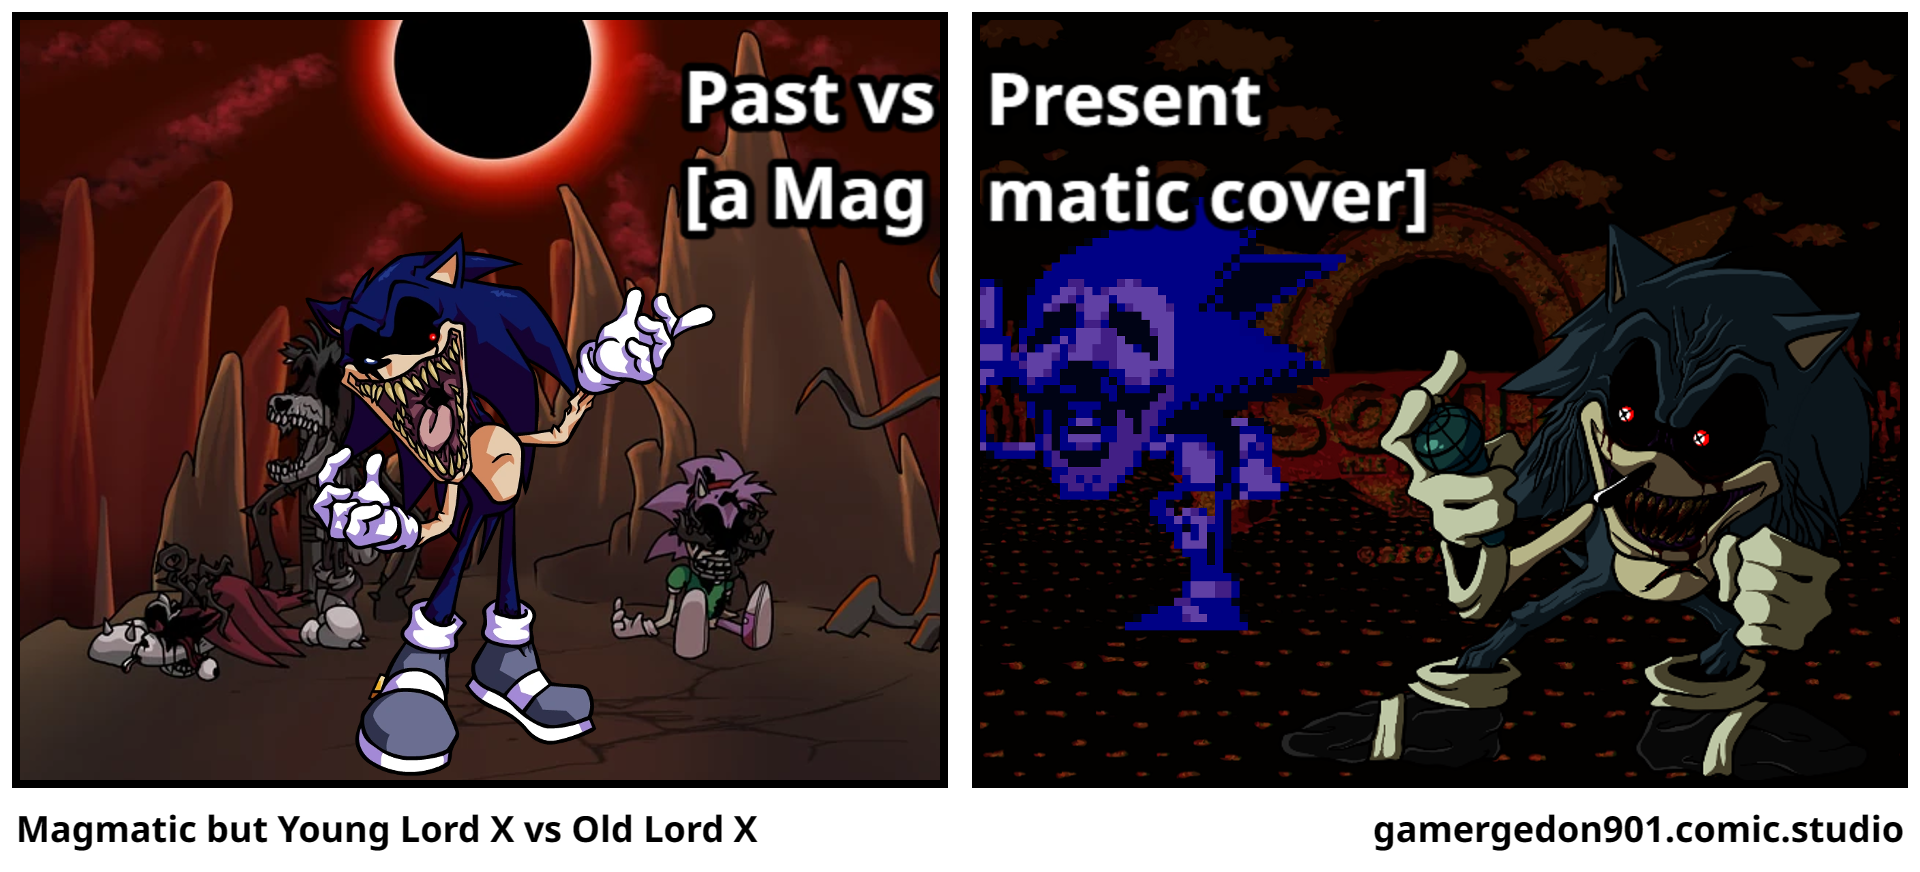 Magmatic but Young Lord X vs Old Lord X